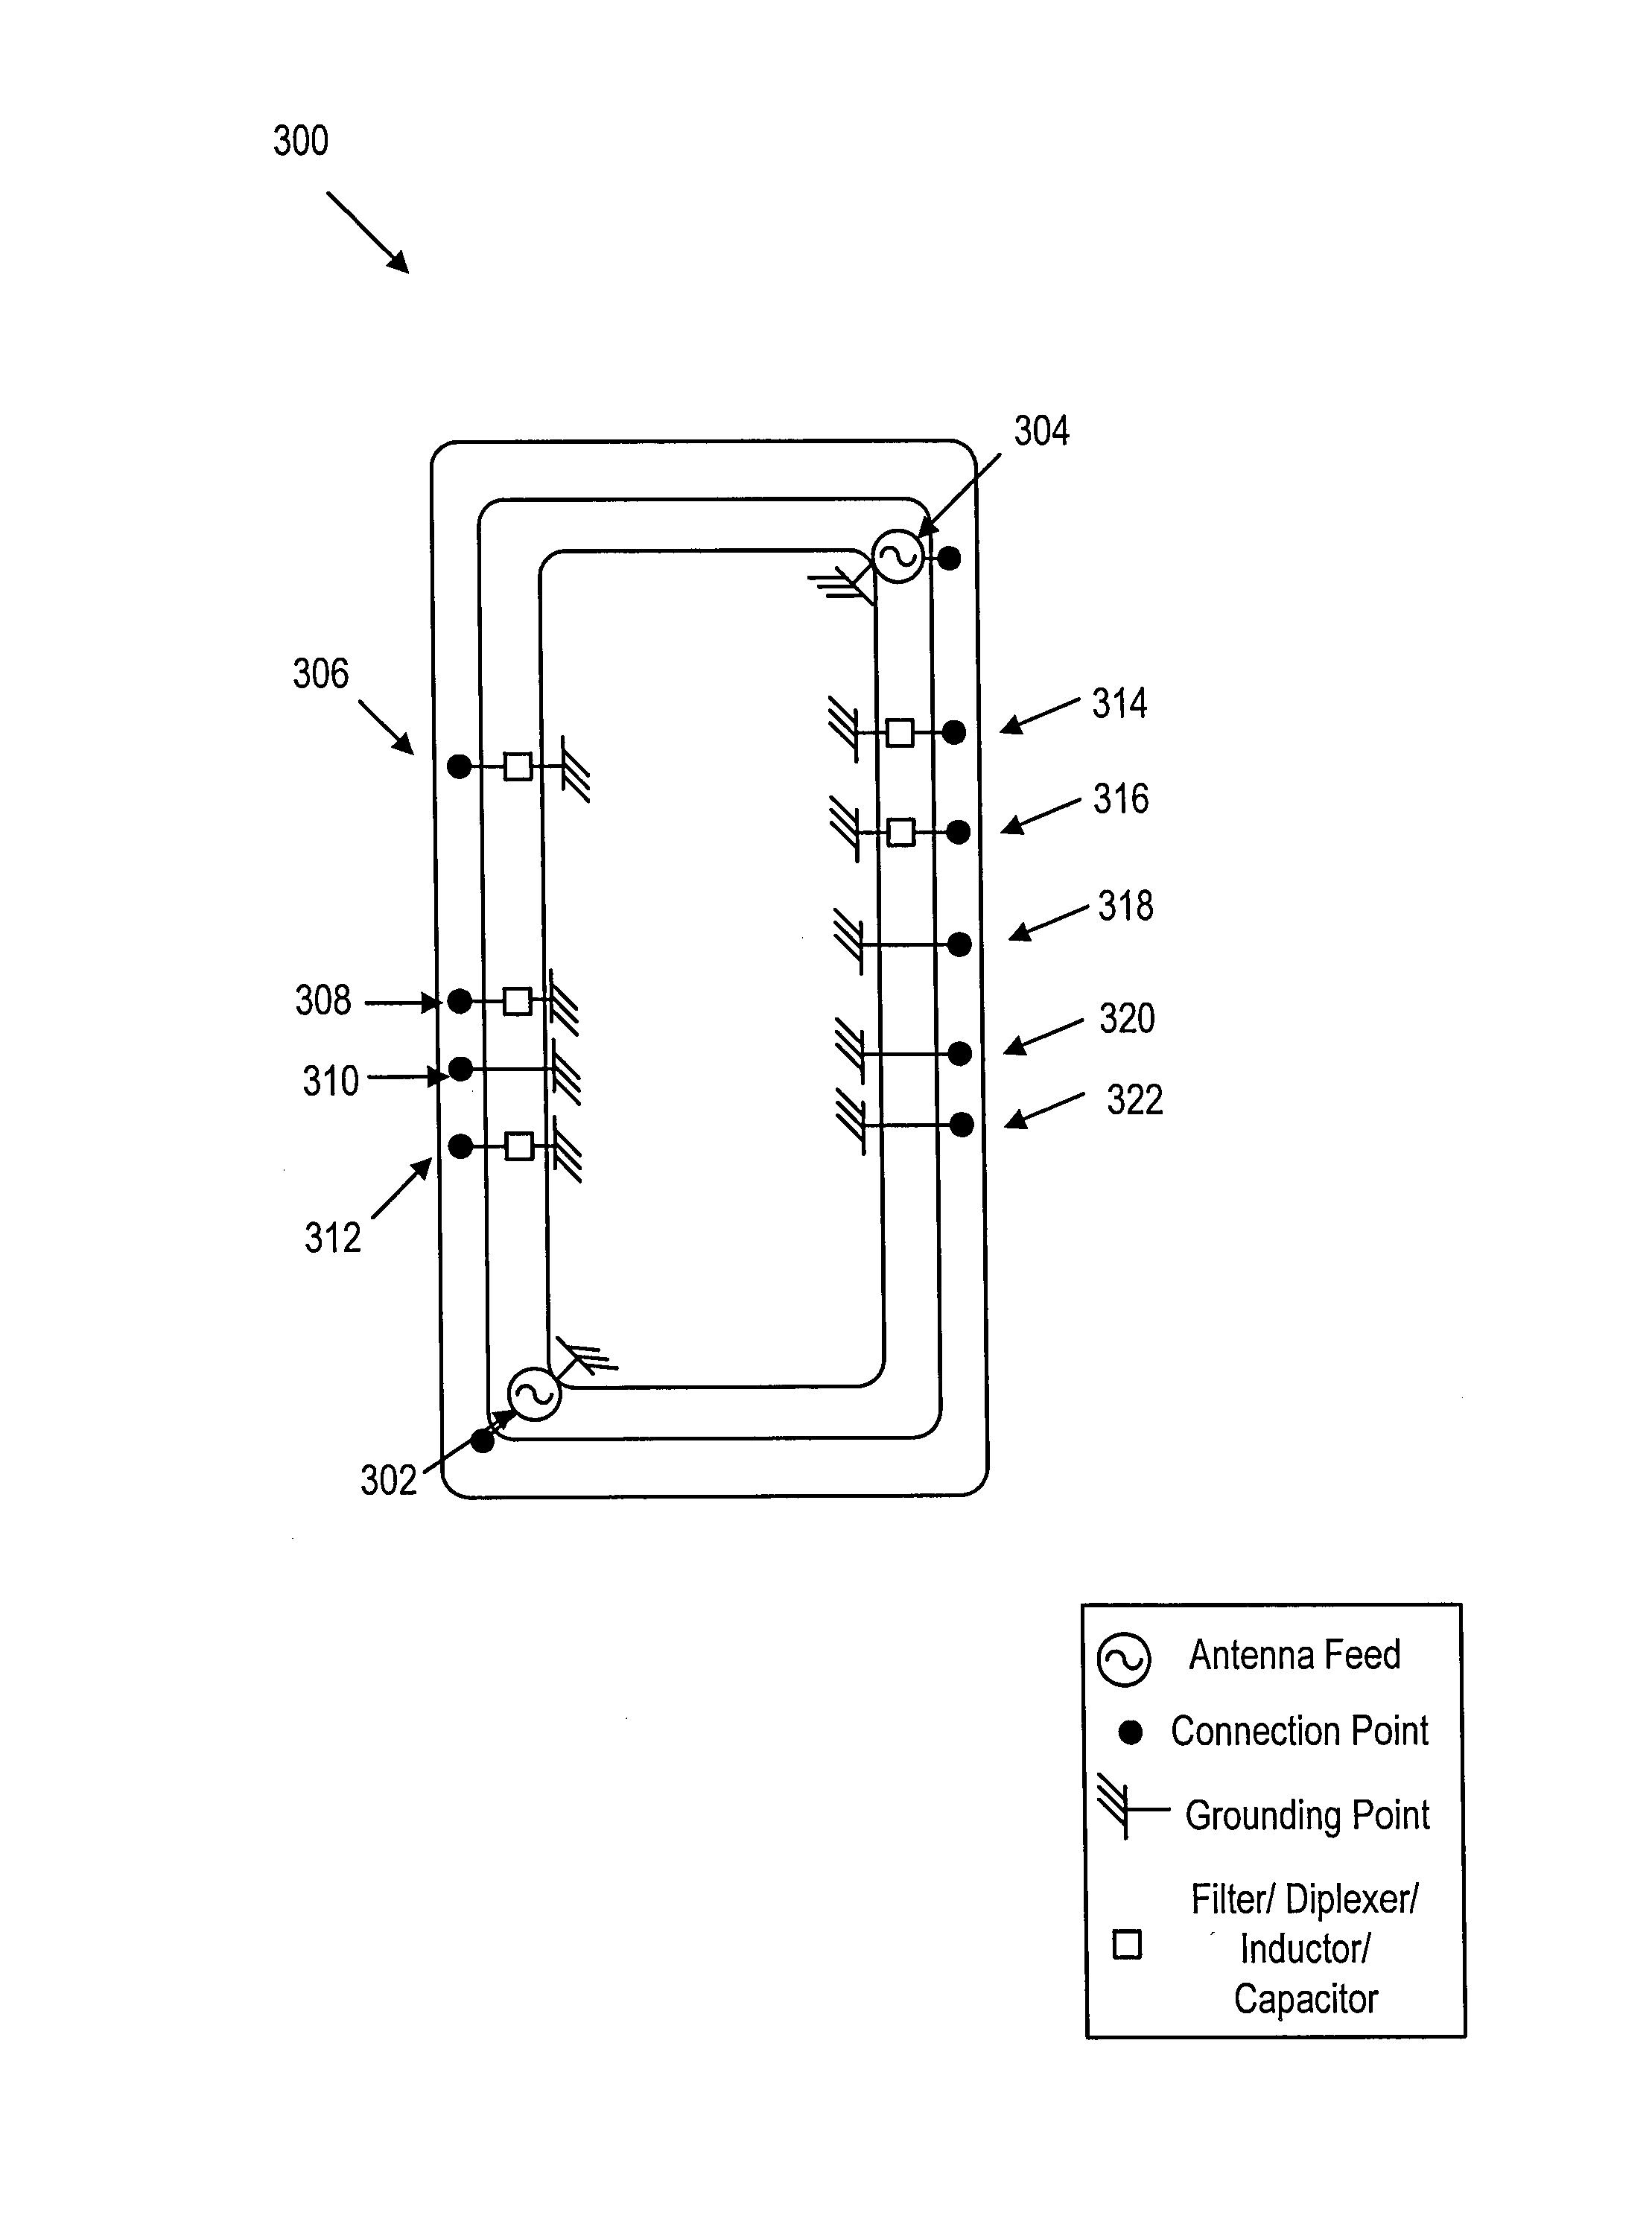 Apparatus for tuning multi-band frame antenna